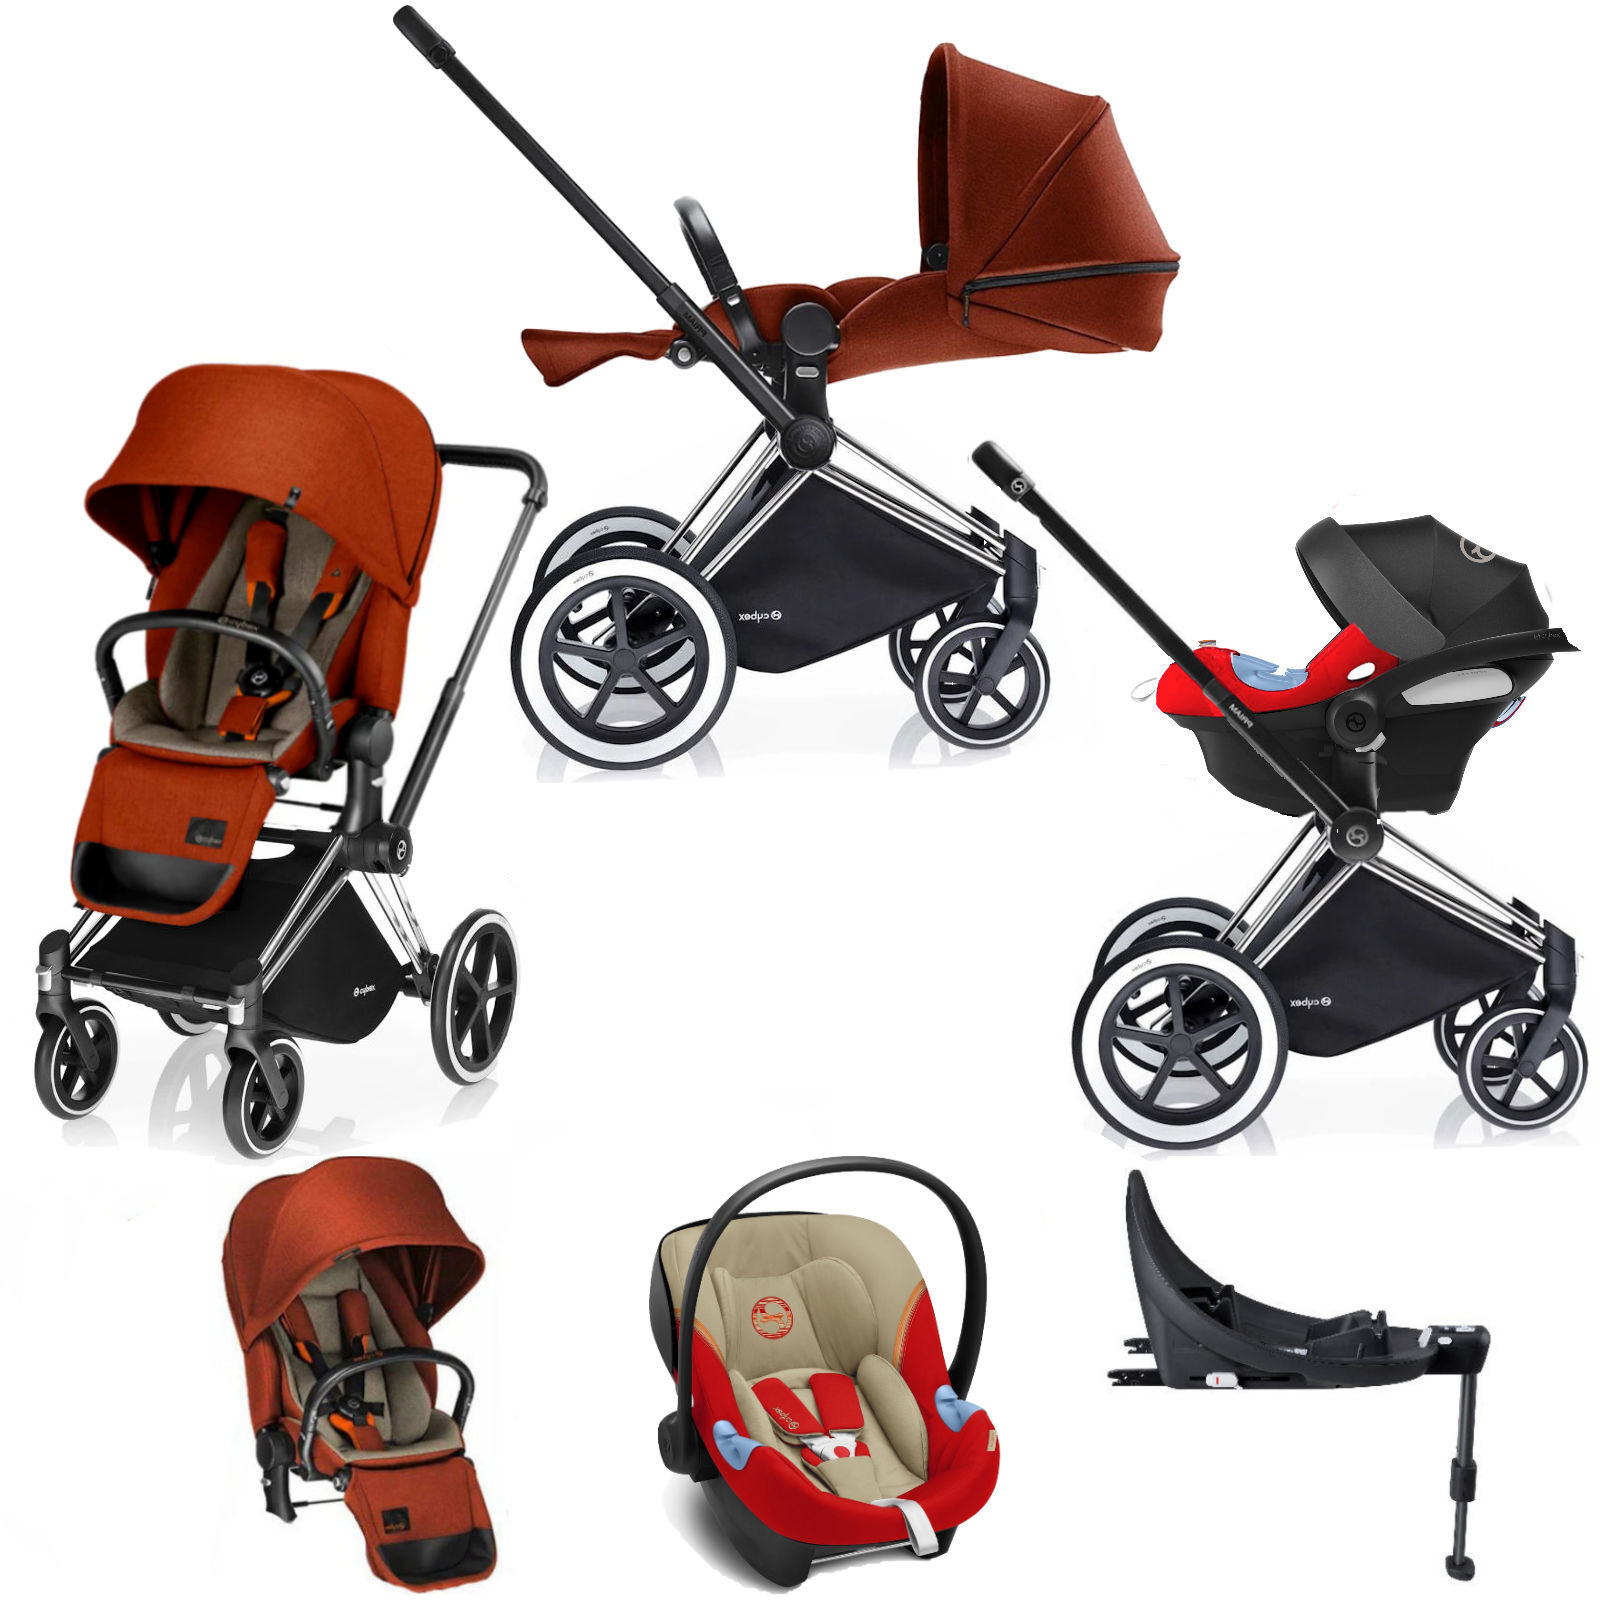 Cybex Priam Lux Platinum (Aton M i-Size) Travel System with Base - Autumn Gold